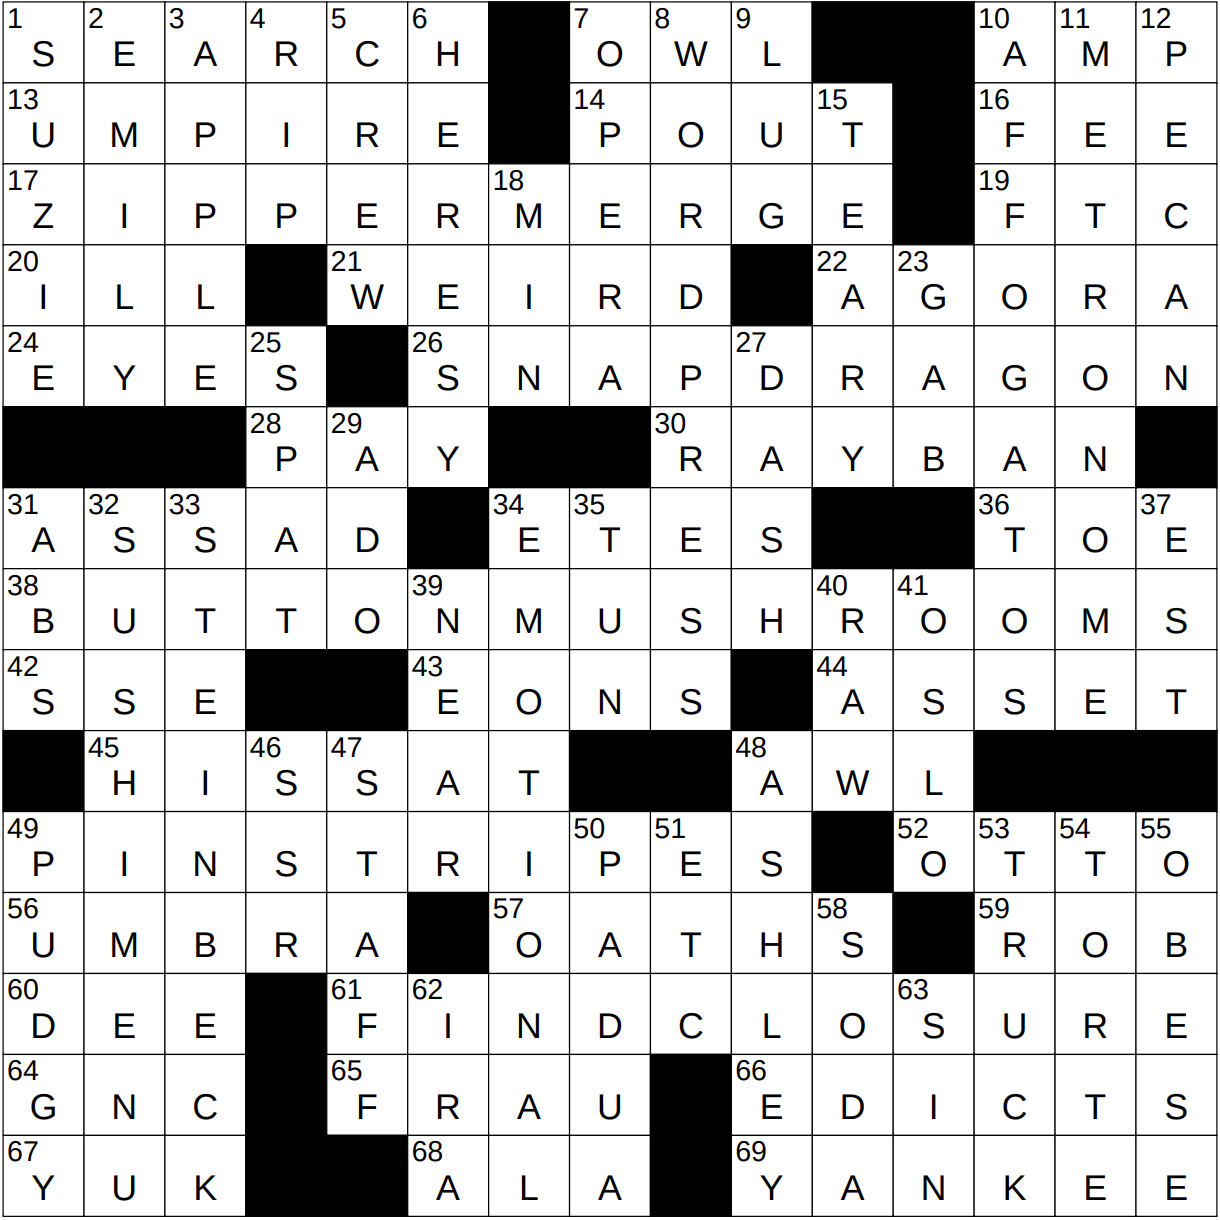 away from the center crossword clue love happiness hope